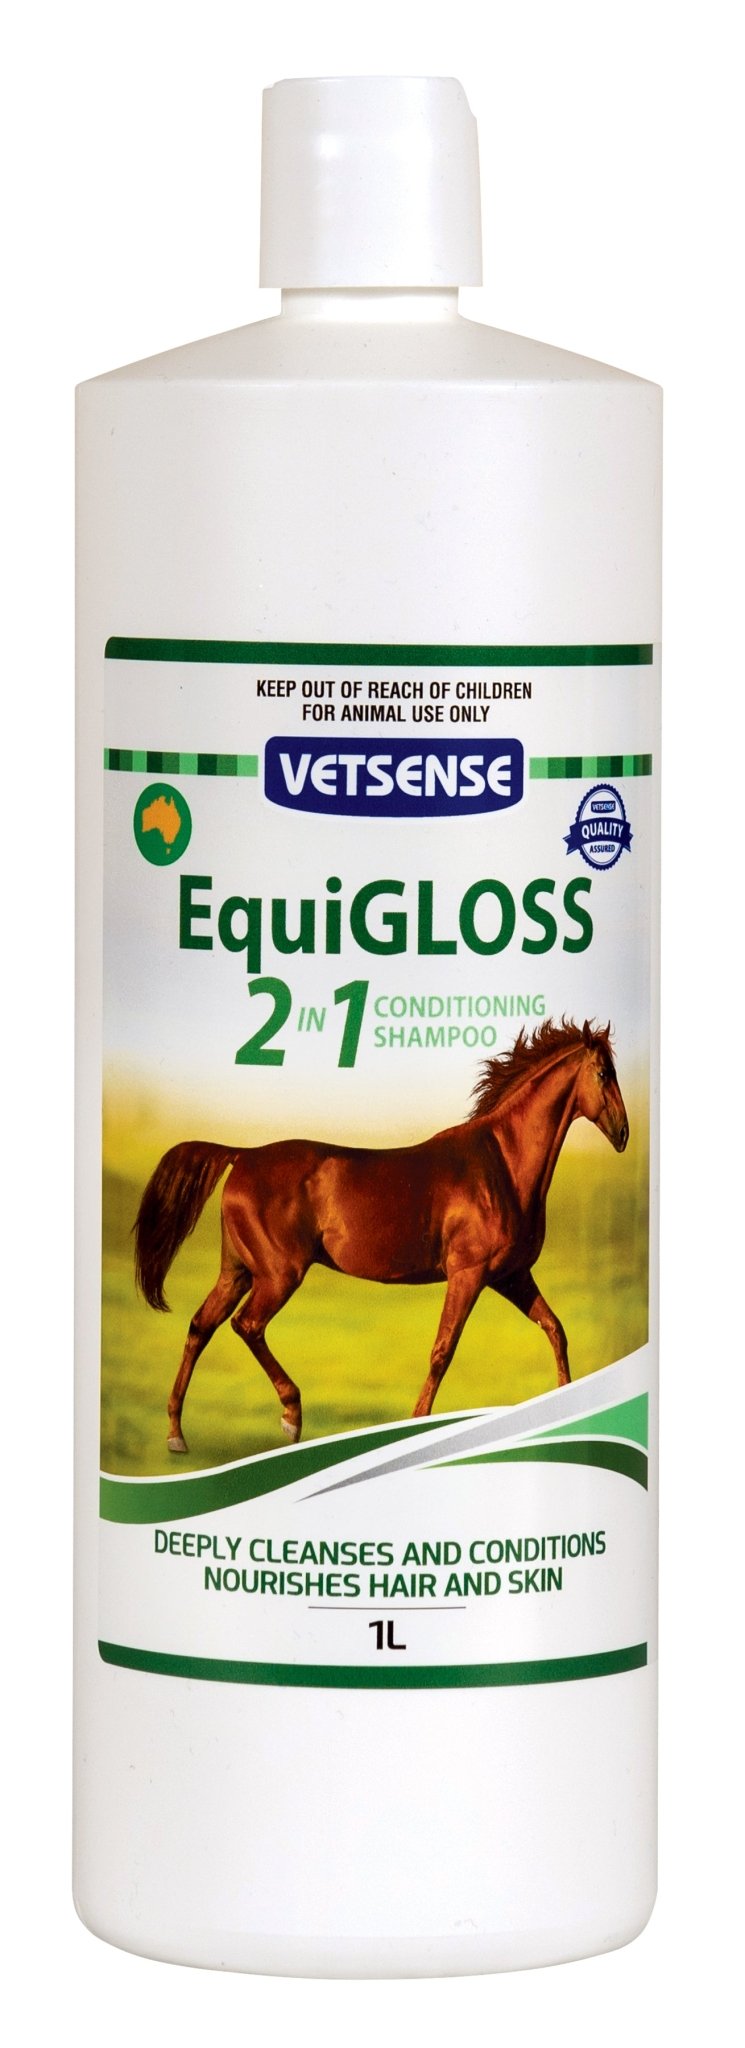 Image of Vetsense EquiGLOSS 2 in 1 conditioning shampoo for horses, available to purchase from Saddleworld Dural.